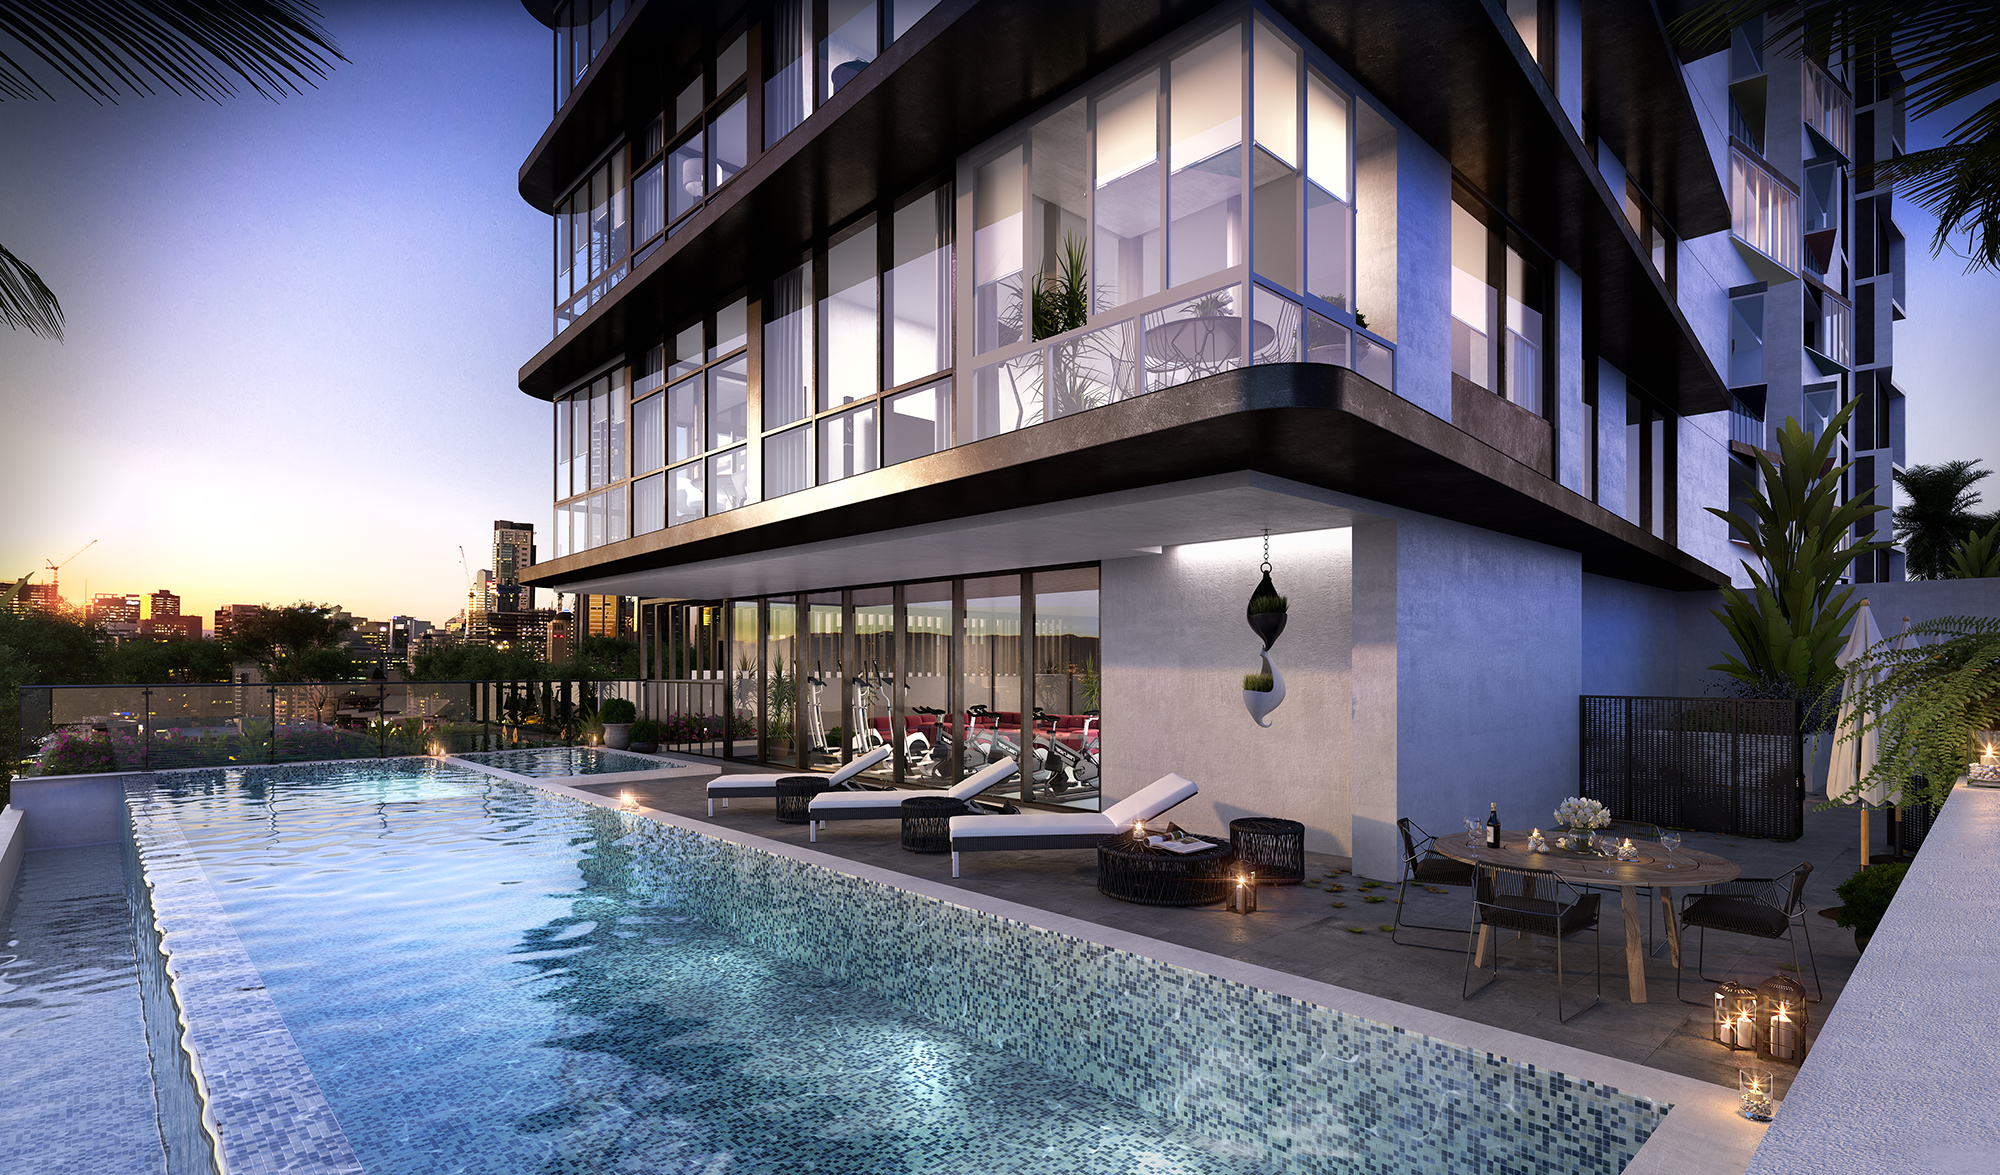 Pool area of an apartment building featuring an infinity pool and comfortable lounge seating. The pool area is located adjacent to a gym space and is overlooked by apartments in the tower above.